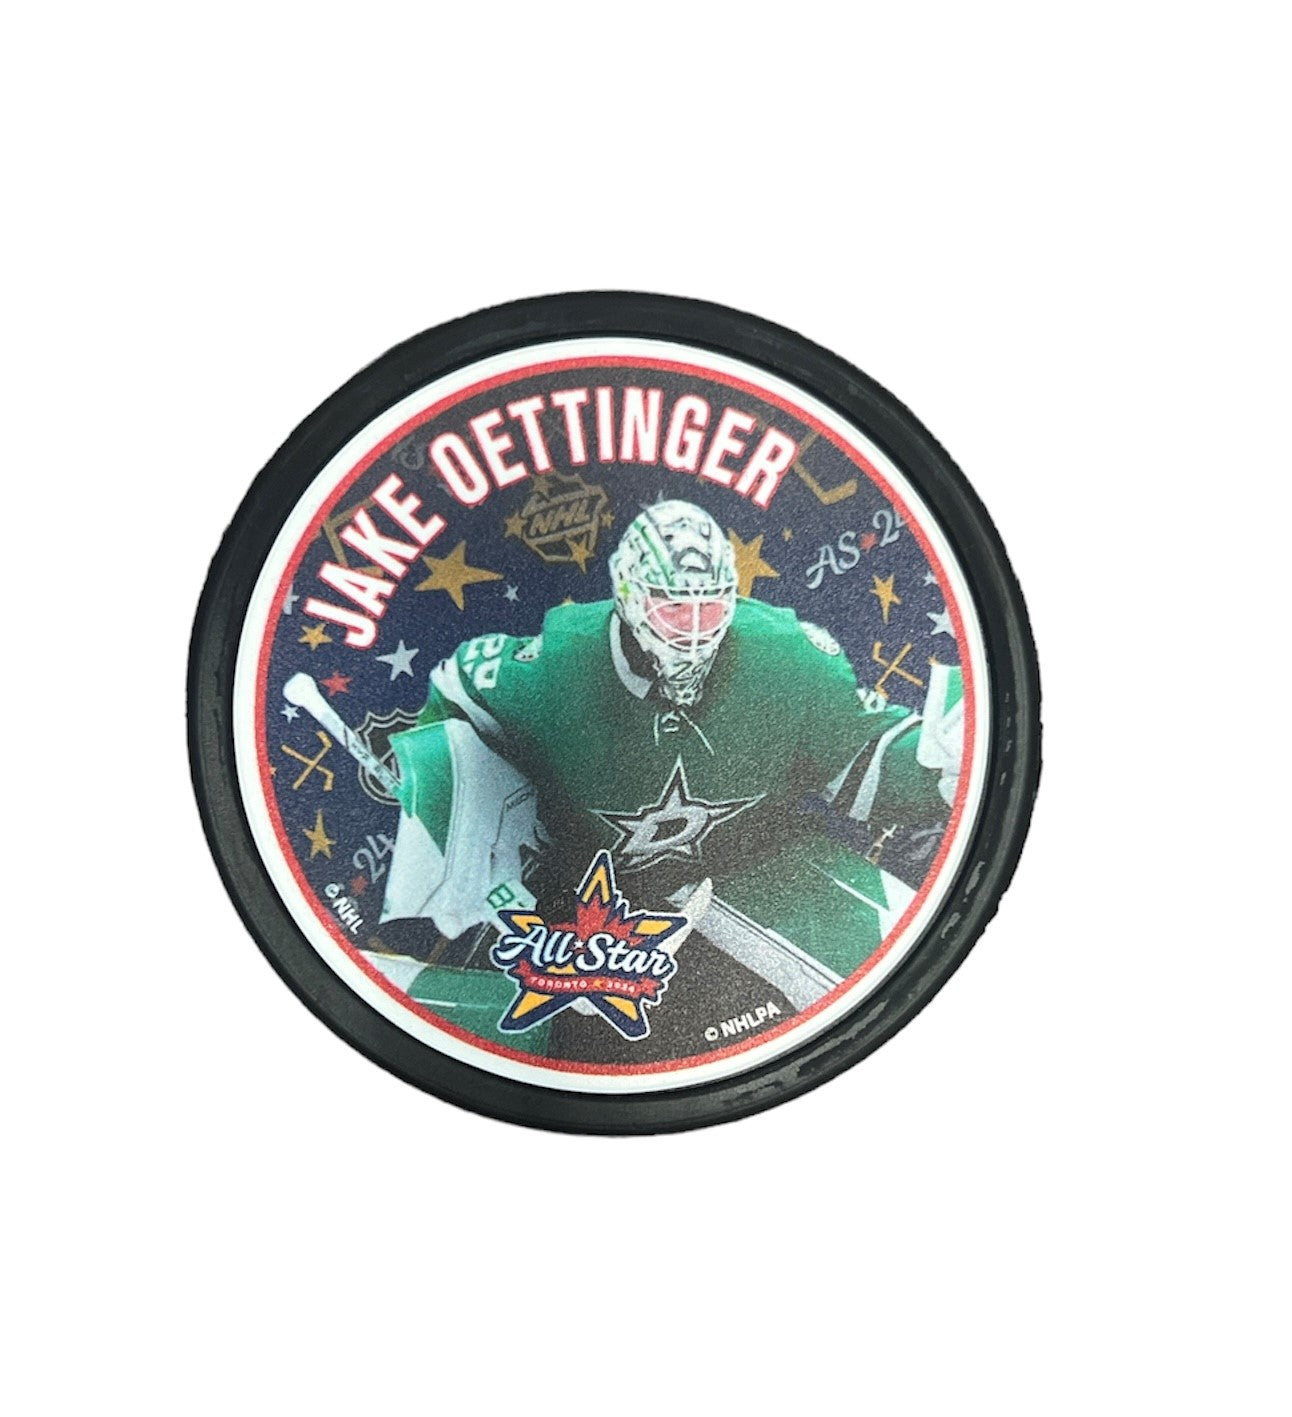 DALLAS STARS MUSTANG JAKE OETTINGER ALL-STAR PUCK - FRONT VIEW